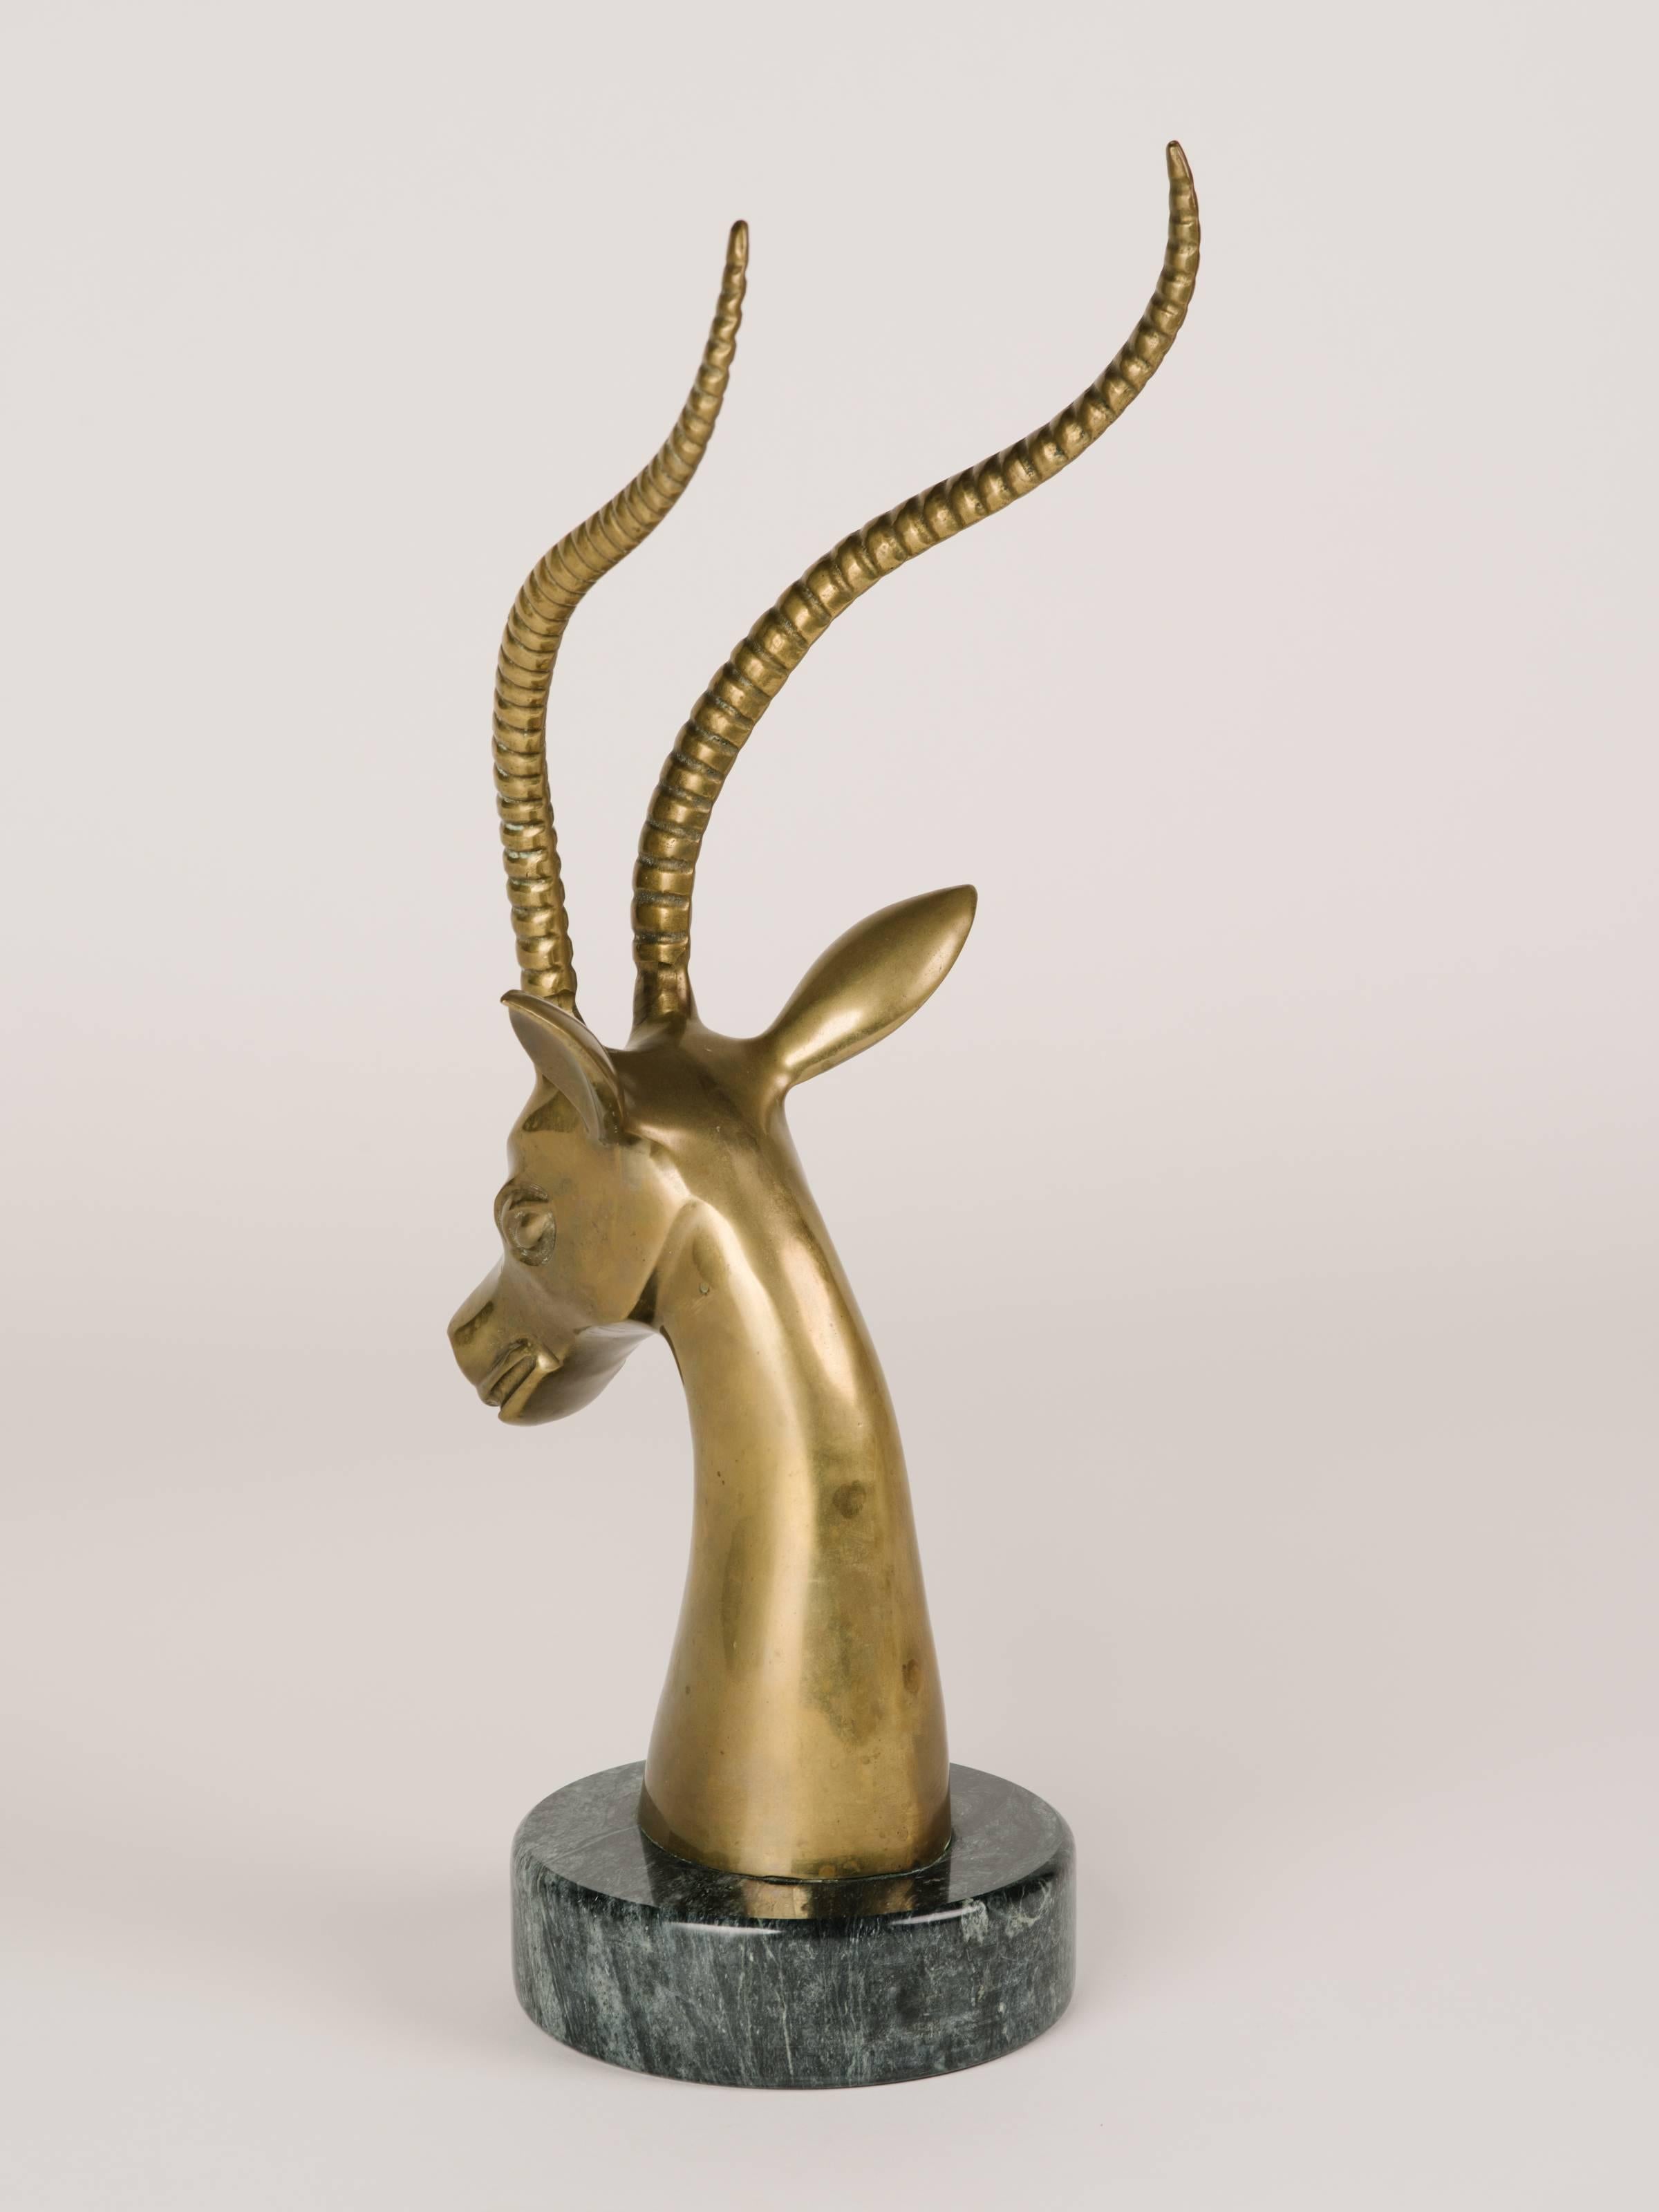 American Mid-Century Modern Brass Gazelle Sculpture with Exotic Marble Base, c. 1970's For Sale